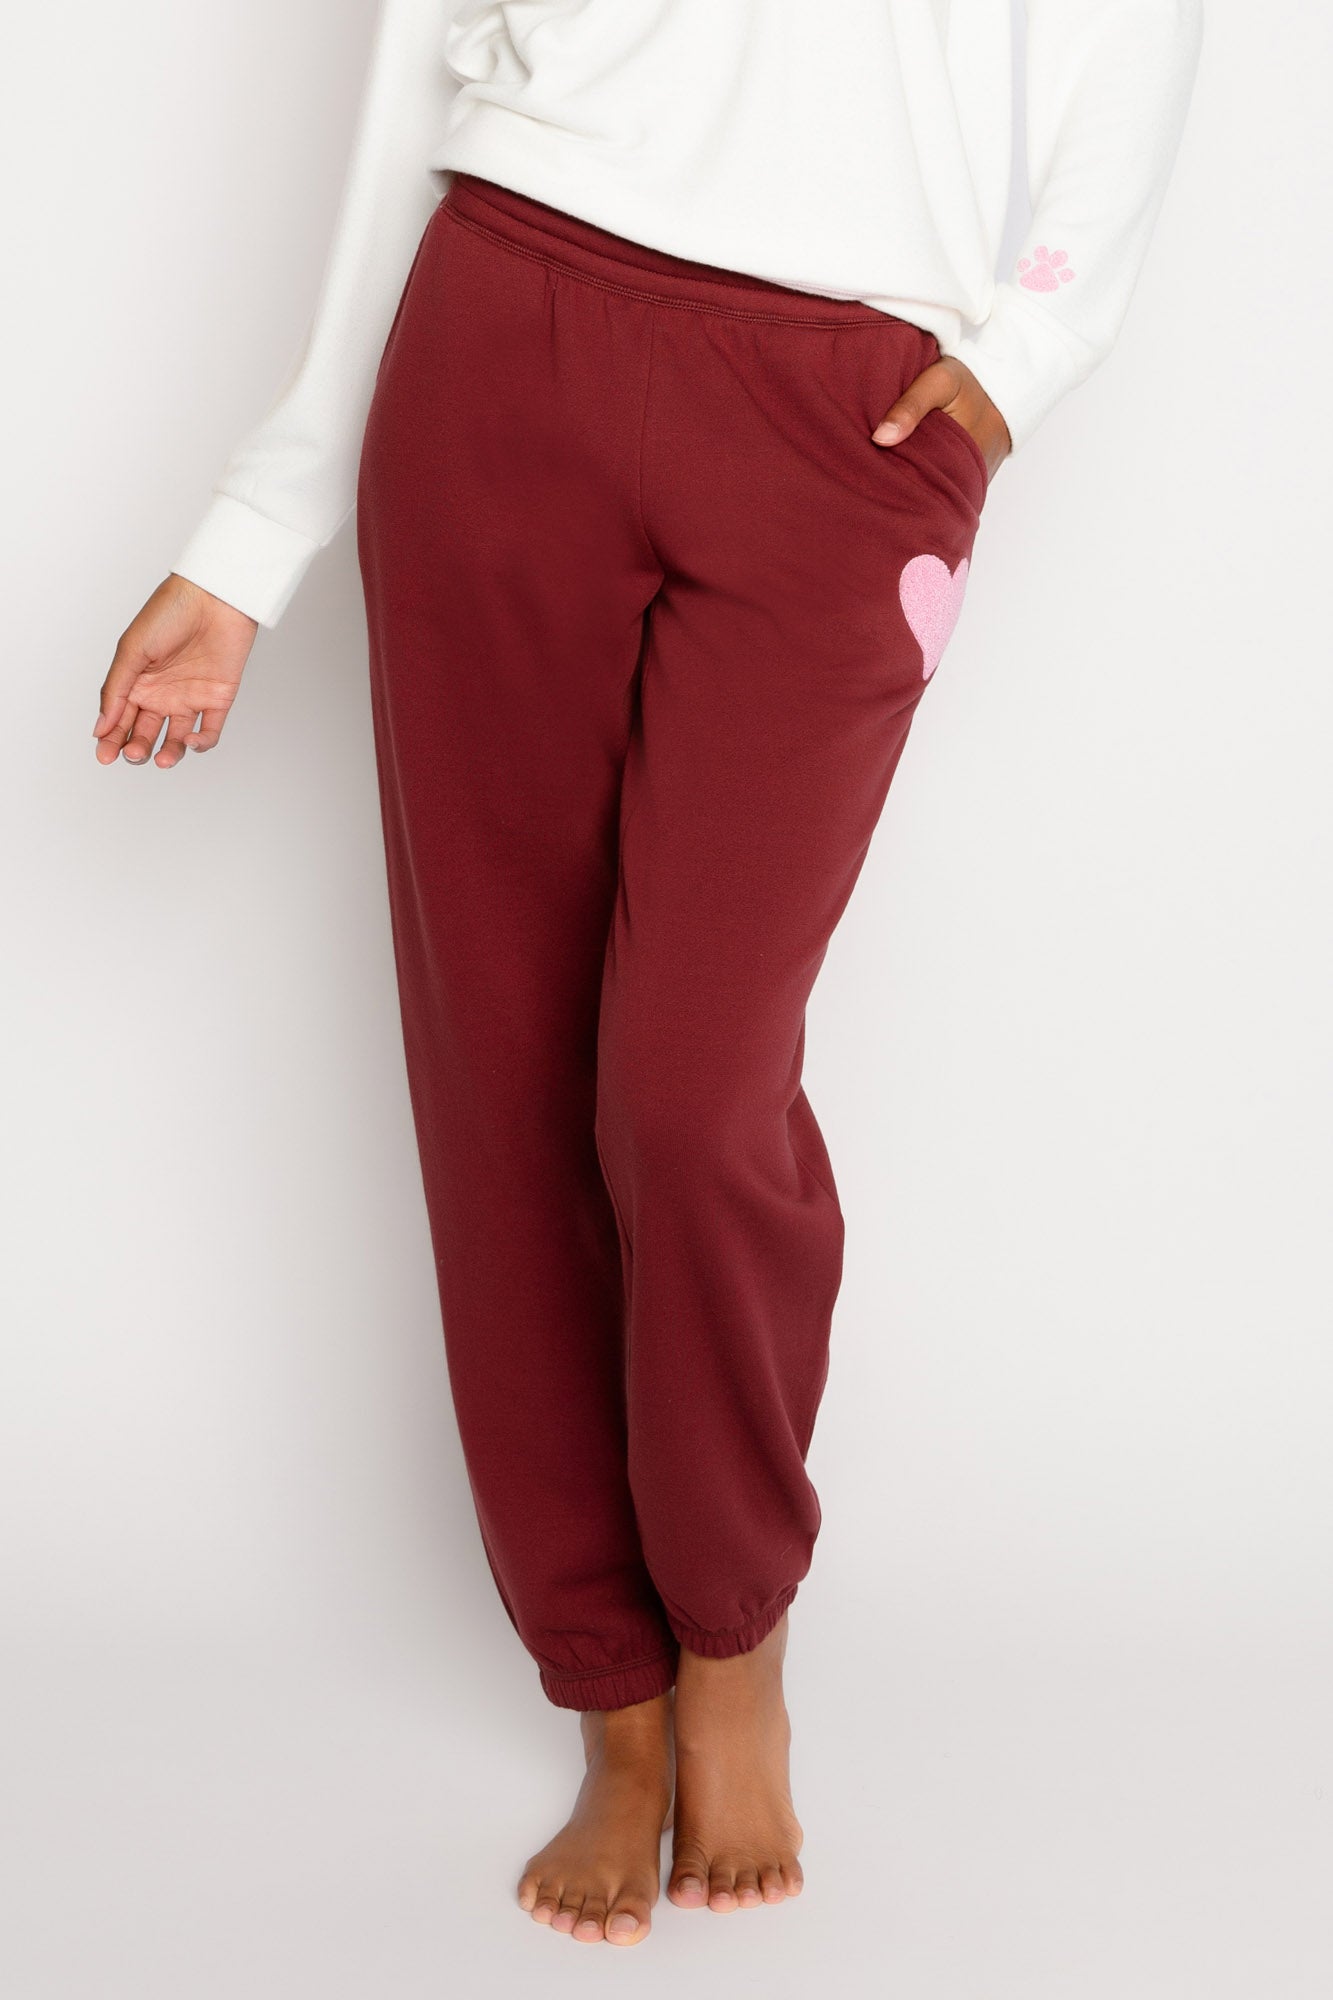 PJ SALVAGE Womens Port Wine Red Super Soft Stretch Lounge Pants Small